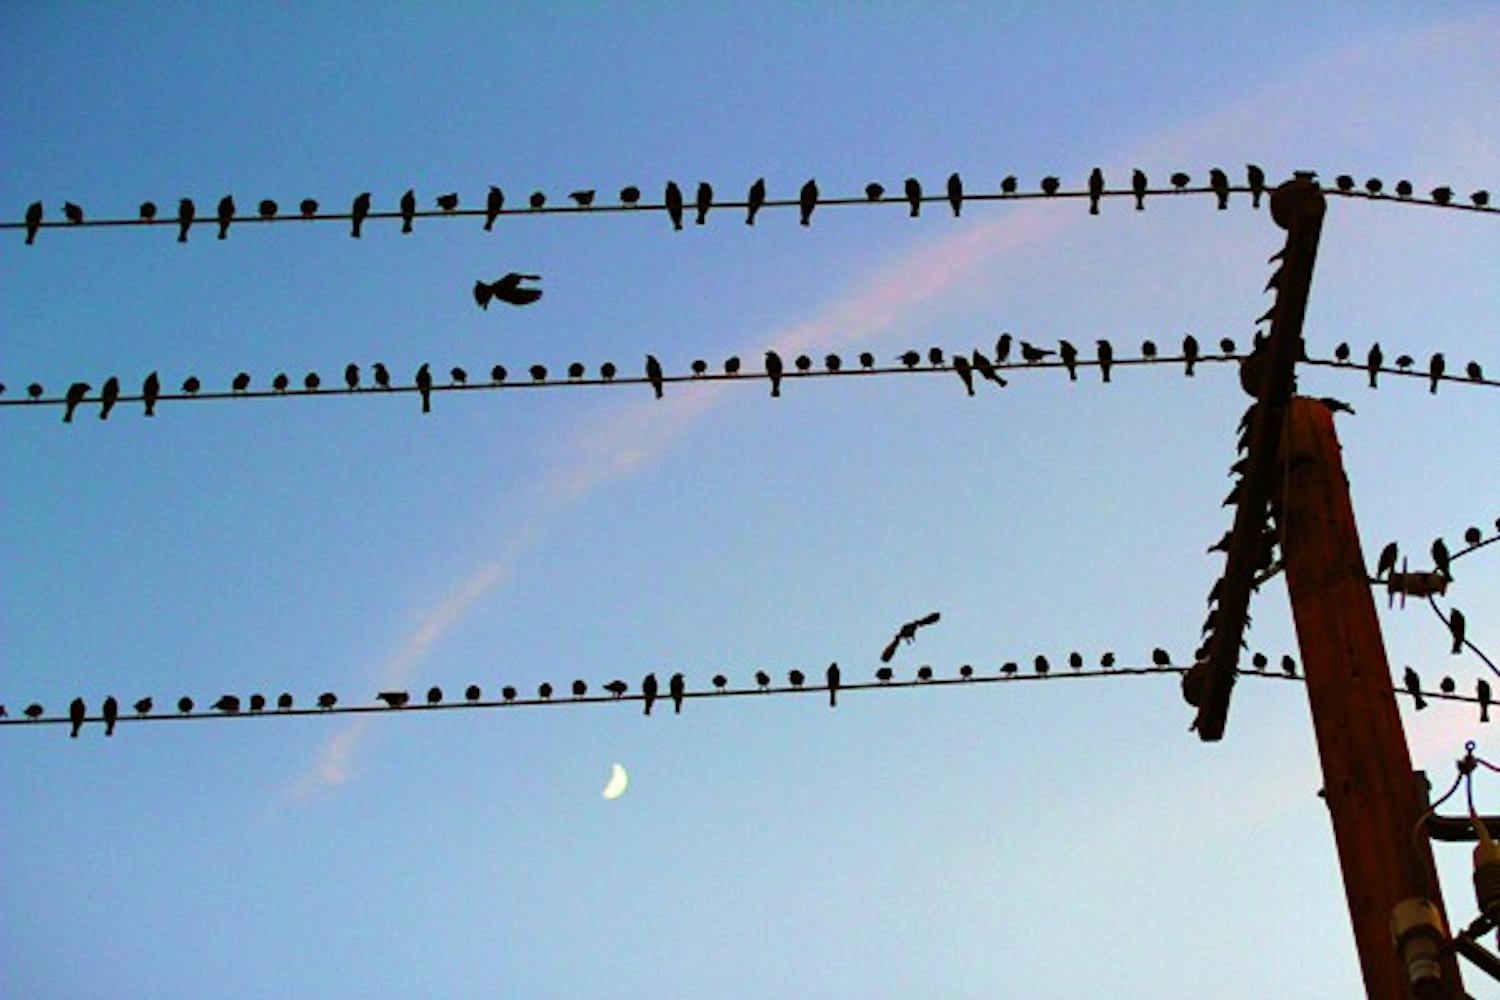 Dozens of birds flock to a power line under a partial moon near the Tempe campus Wednesday evening. (Photo by Lisa Bartoli)